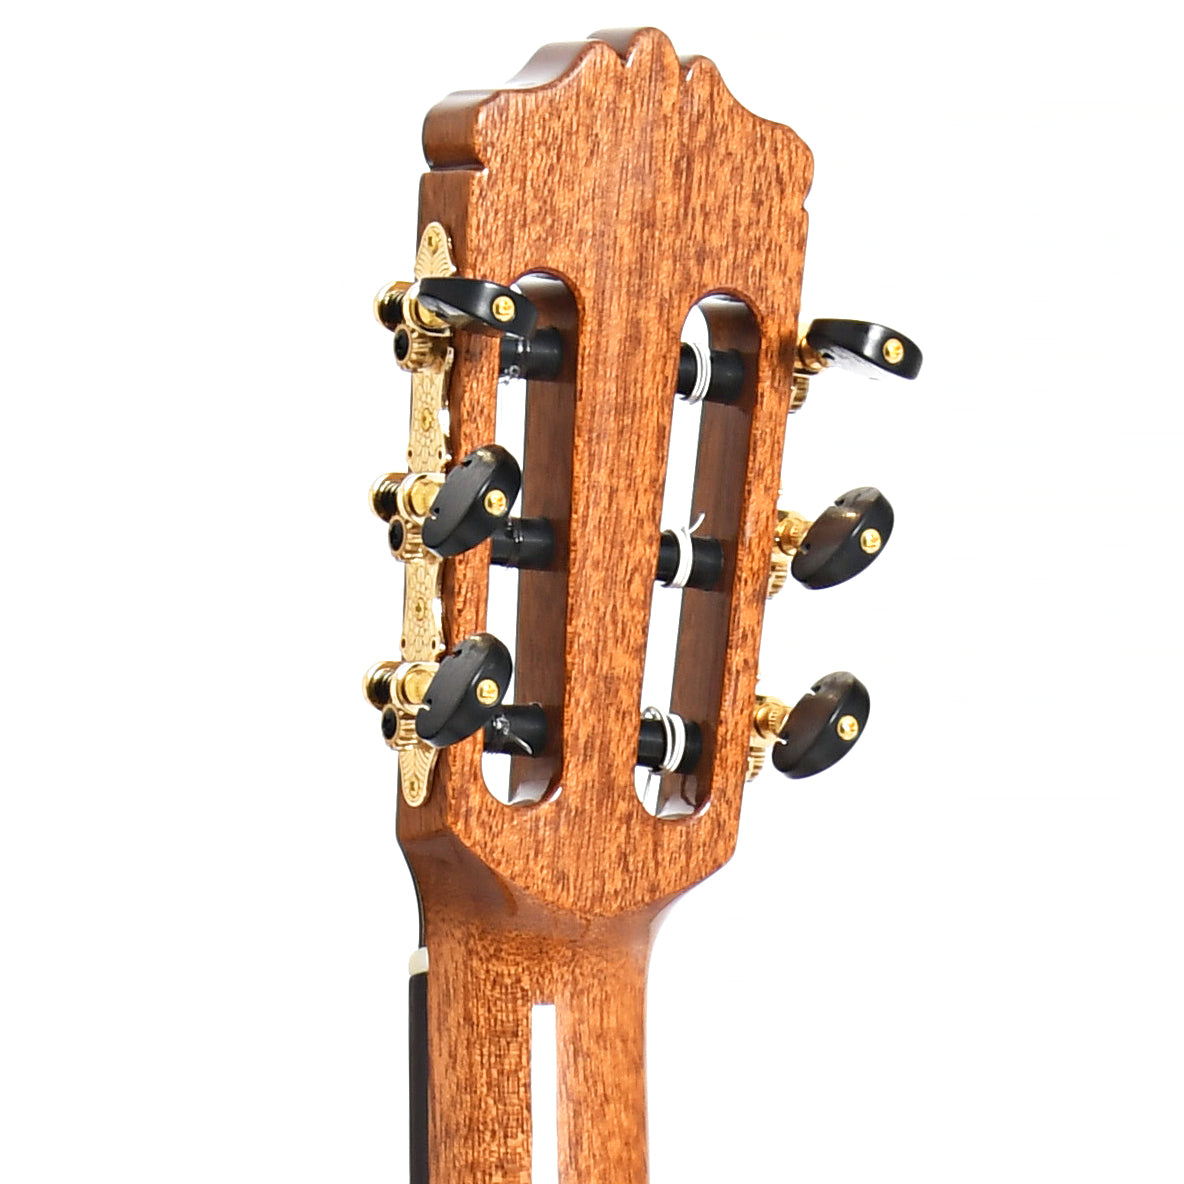 Image 9 of Cordoba C9 Parlor Classical Guitar and Case - SKU# CORC9D : Product Type Classical & Flamenco Guitars : Elderly Instruments